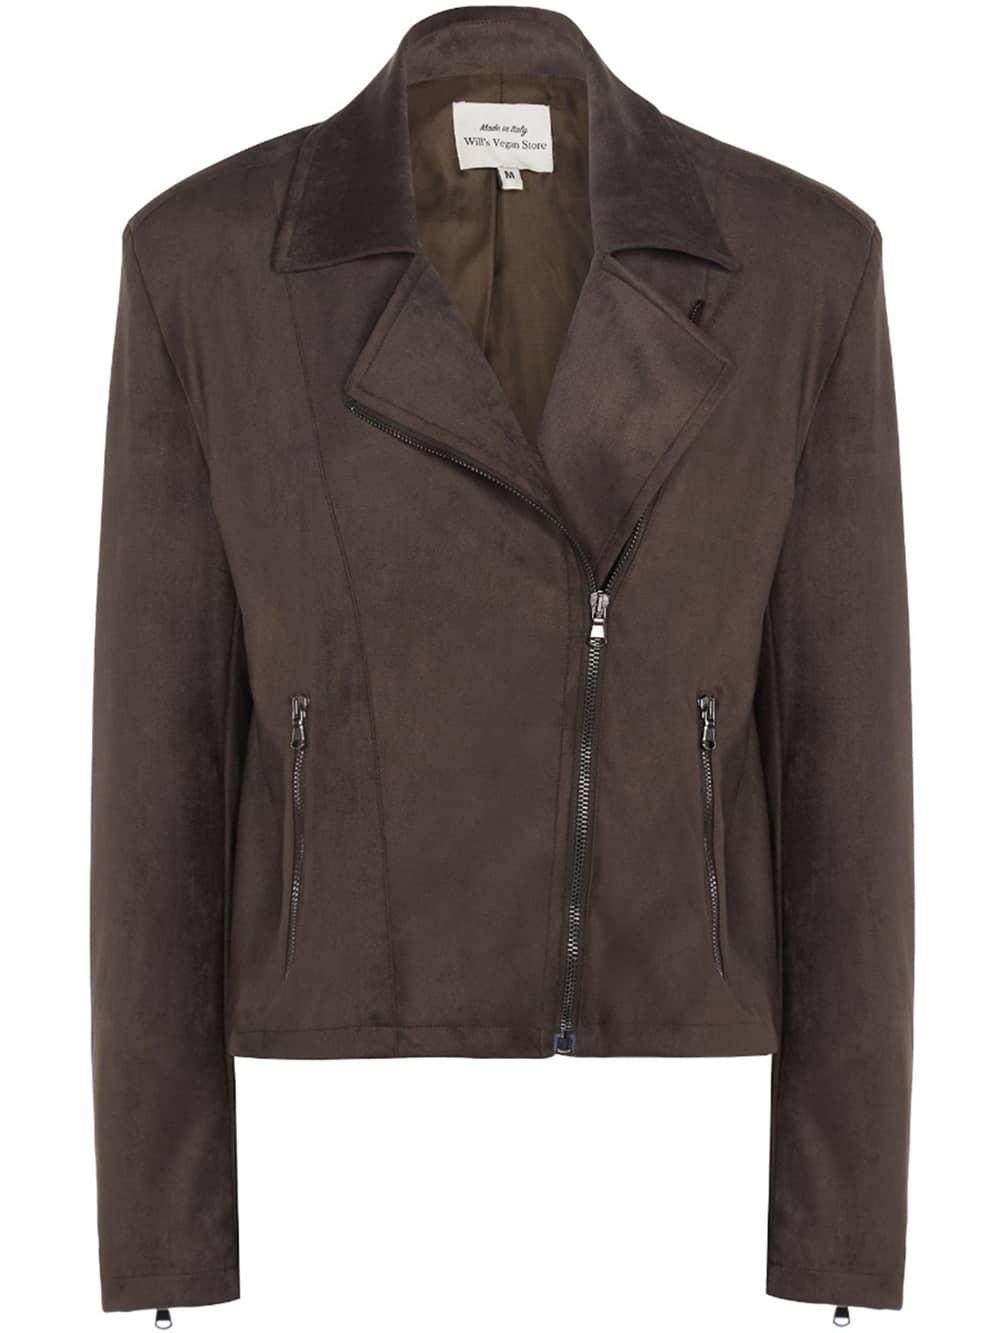 Brown vegan leather jacket with asymmetrical zipper and two side zip pockets